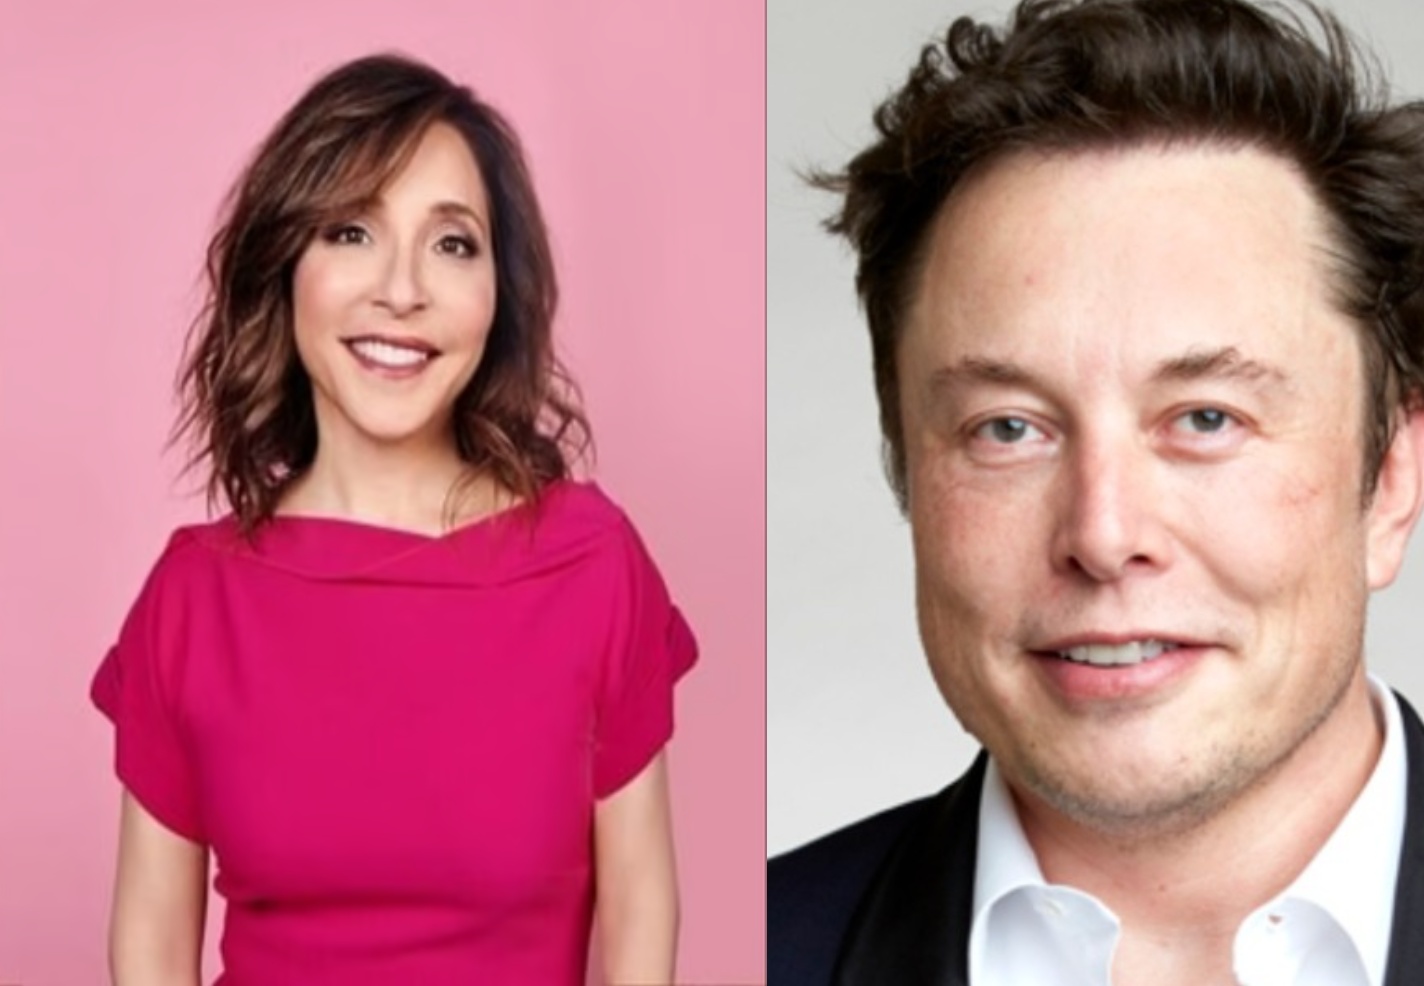 Elon Musk Appoints Linda Yaccarino as Twitter’s New CEO Amidst Plans to Revamp Network into Twitter 2.0